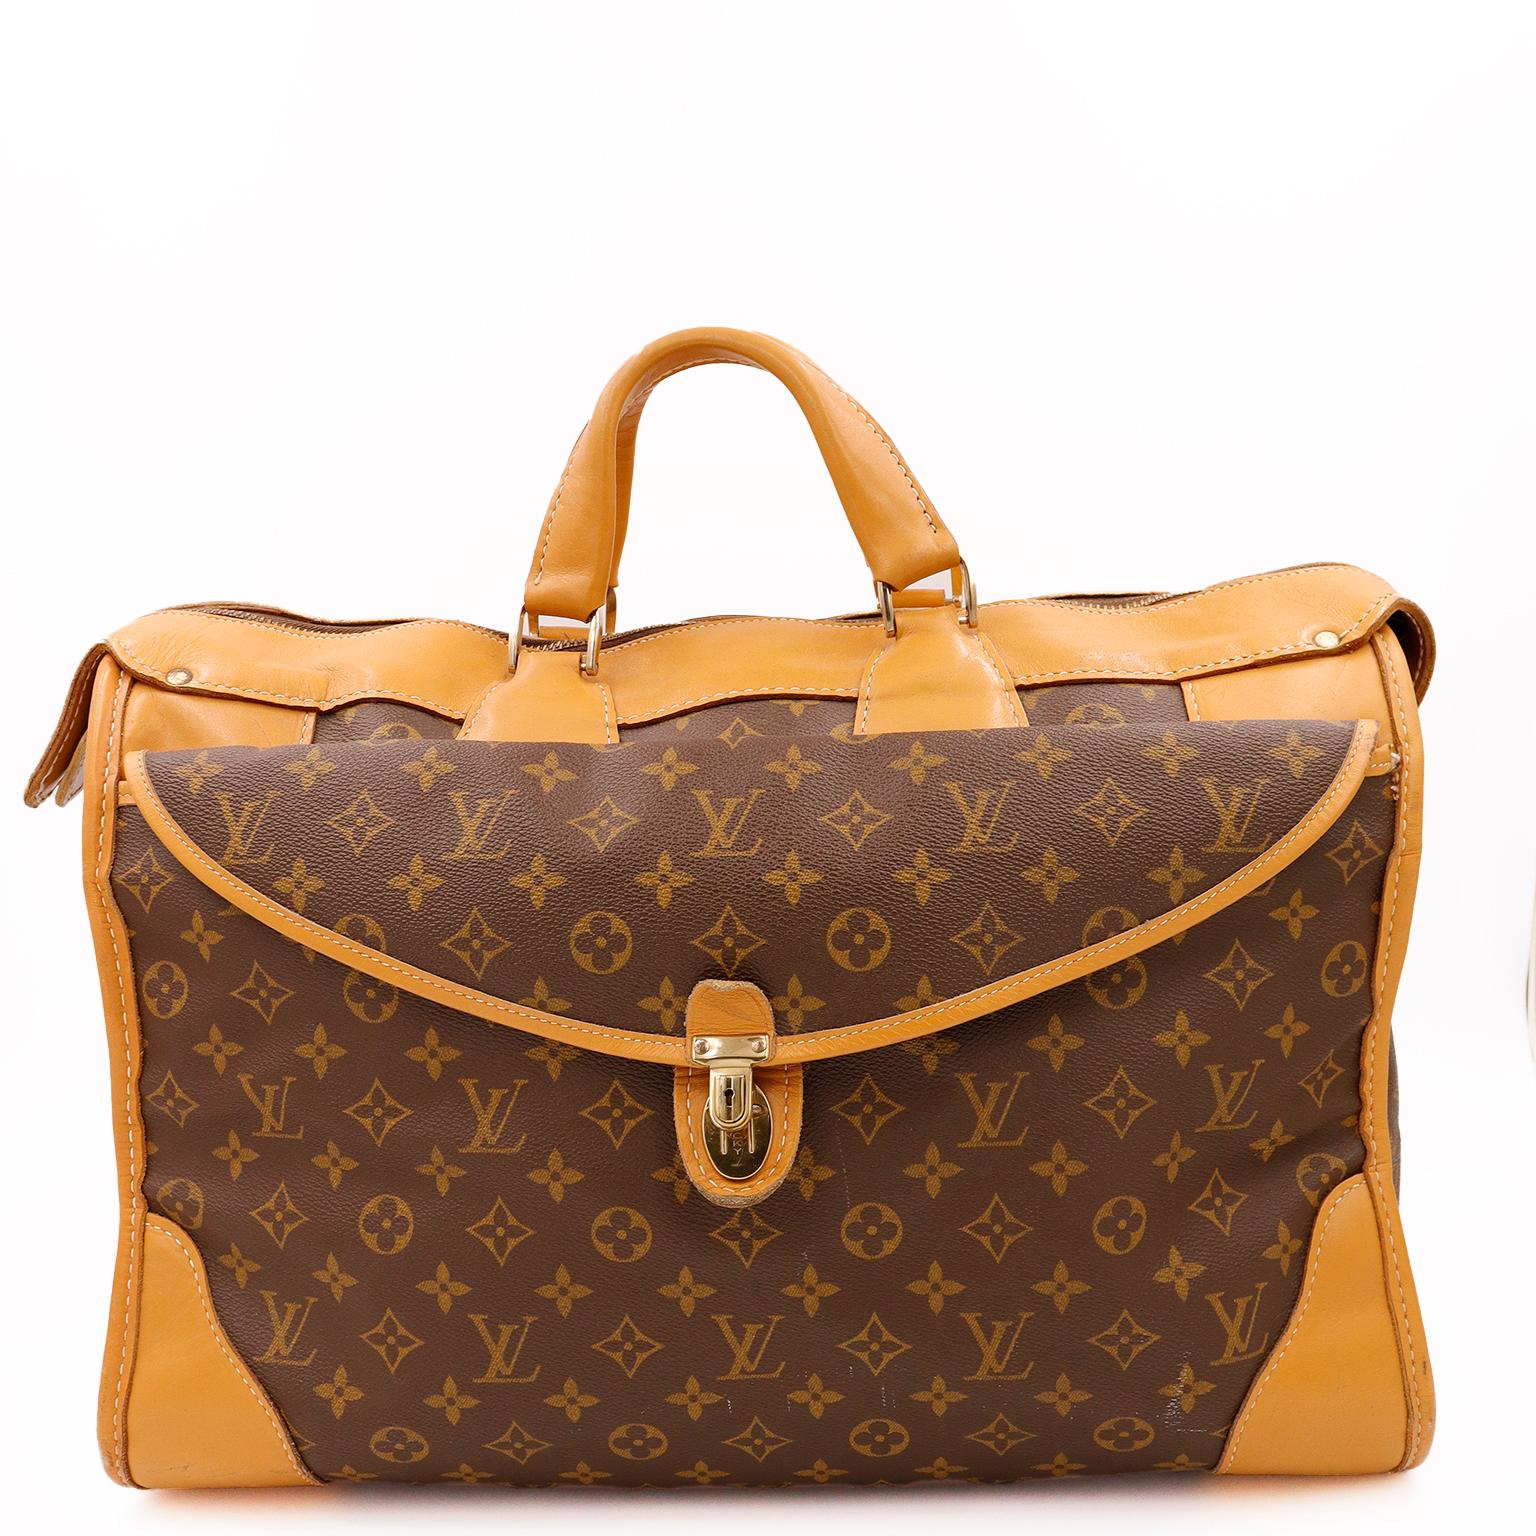 This rare vintage 1980's Louis Vuitton monogram canvas and leather weekender travel bag was made in the USA for Louis Vuitton by the French Luggage Company.

In response to the high demand for Louis Vuitton bags in the US in the 1970's. the company